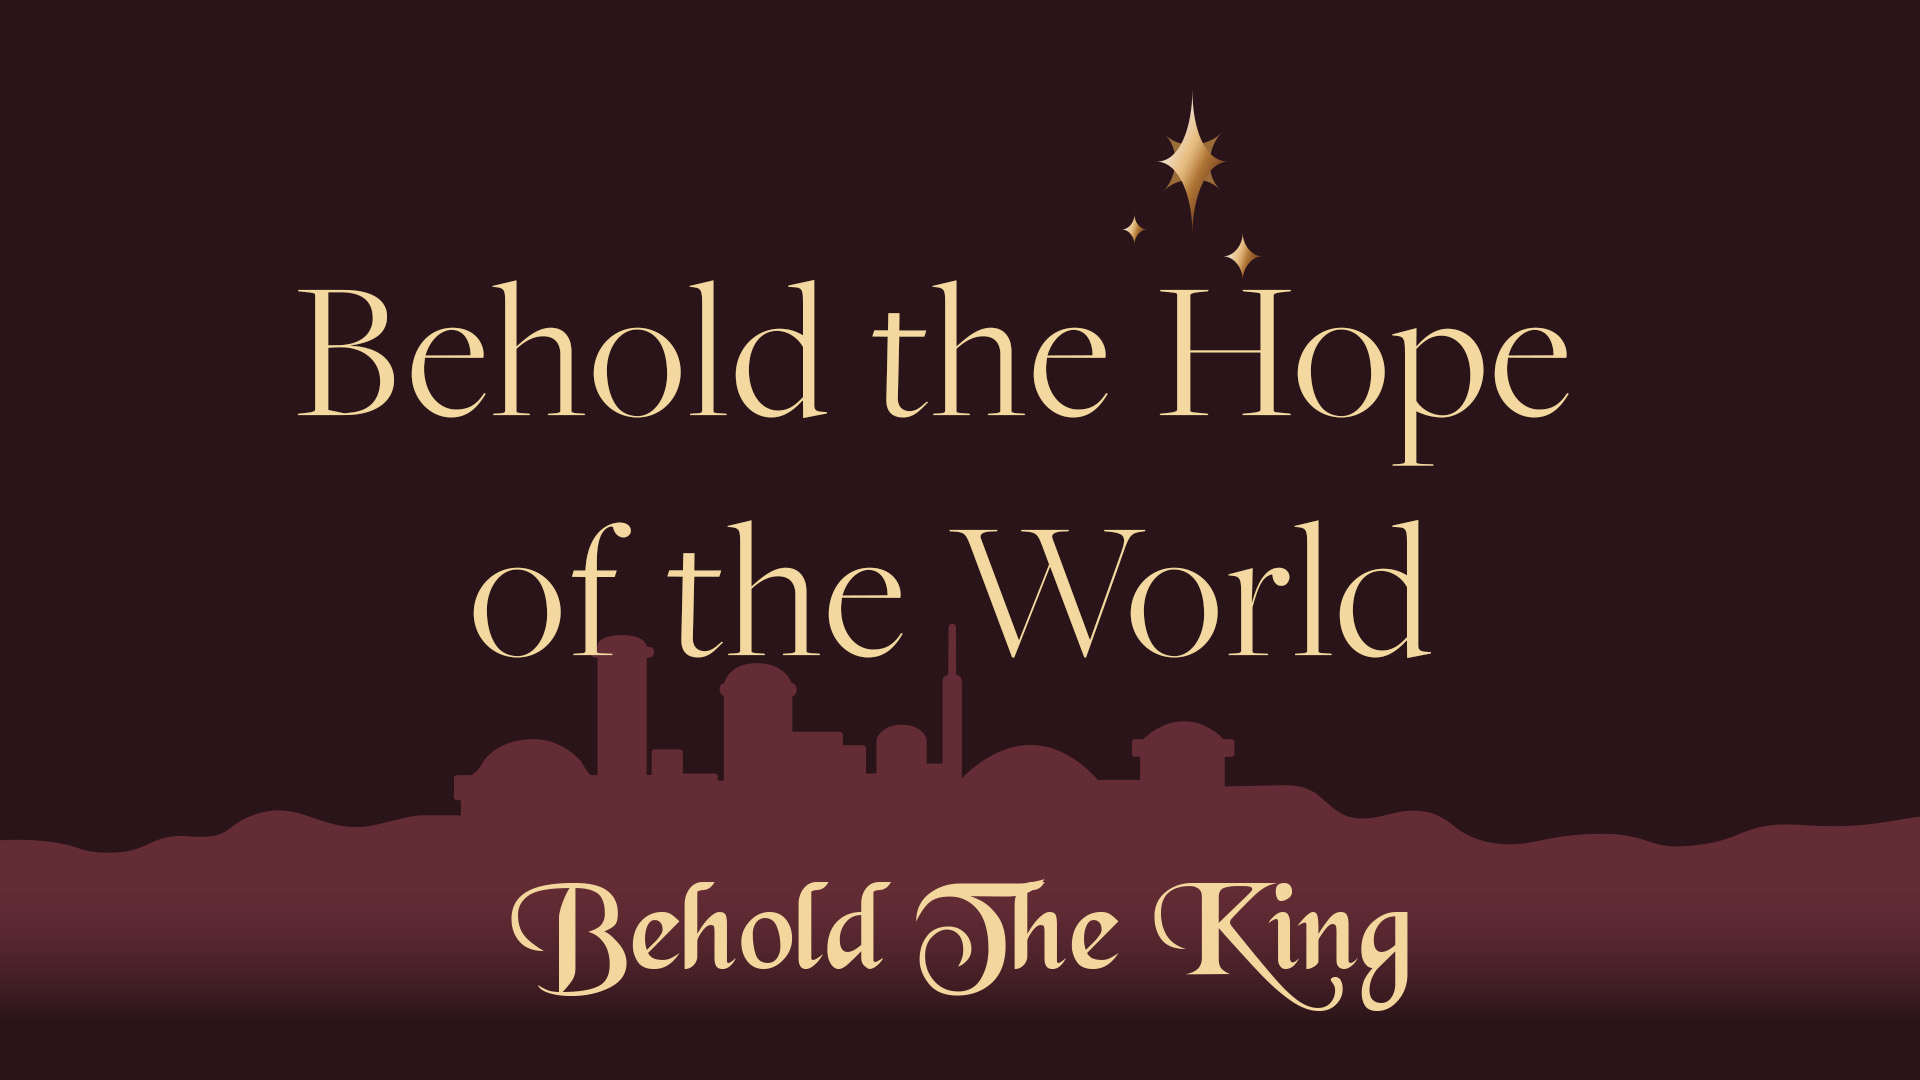 Behold the Hope of the World